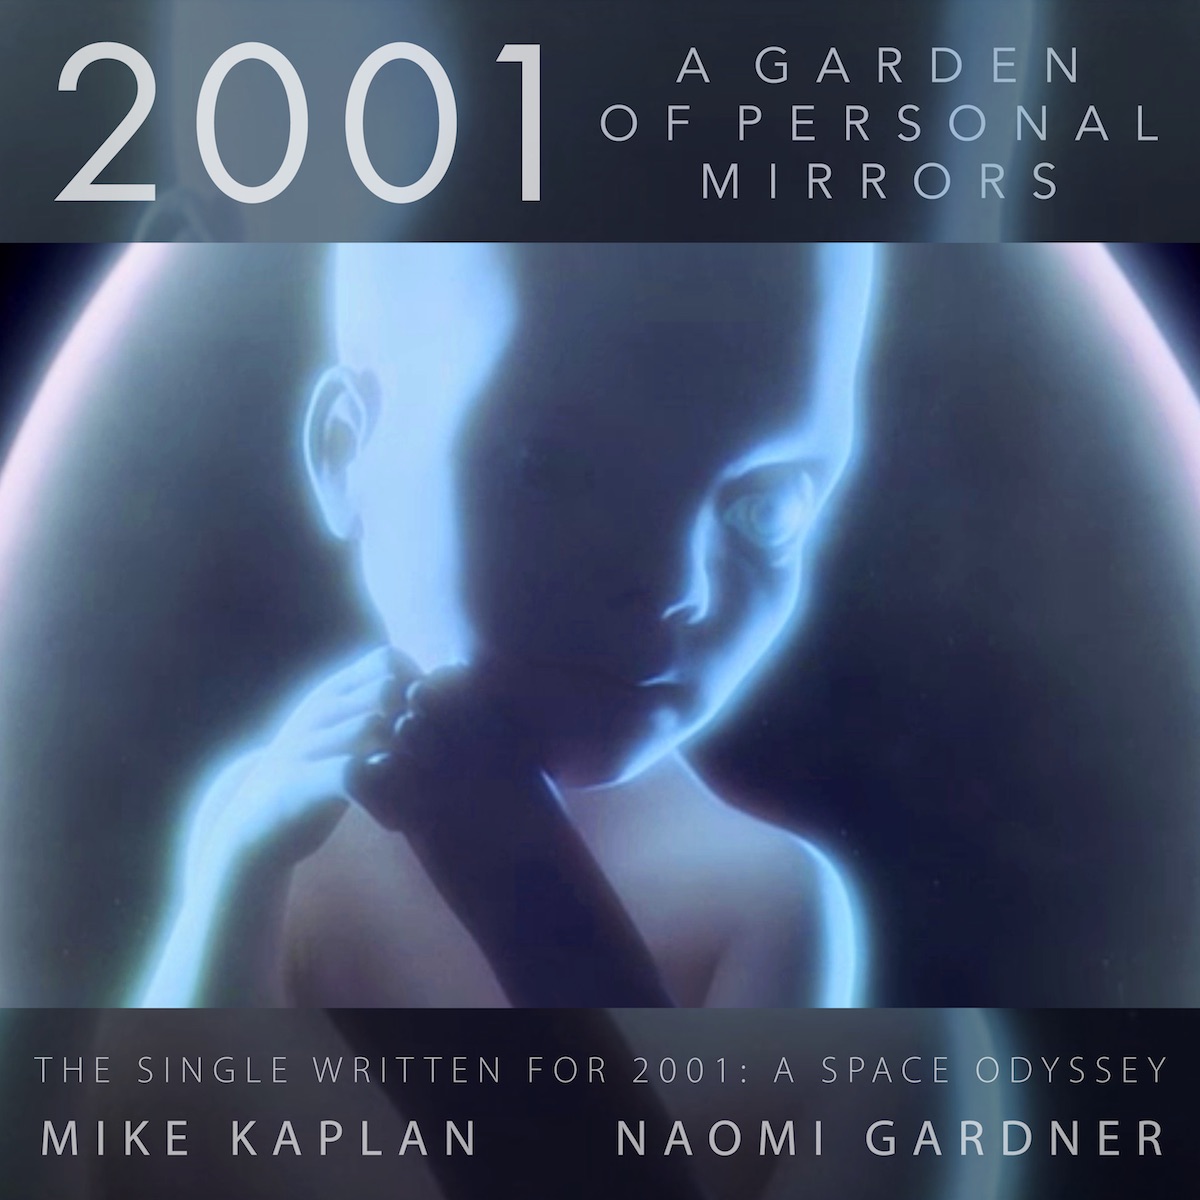 Mike Kaplan - 2001: A Garden of Personal Mirrors (The Single)